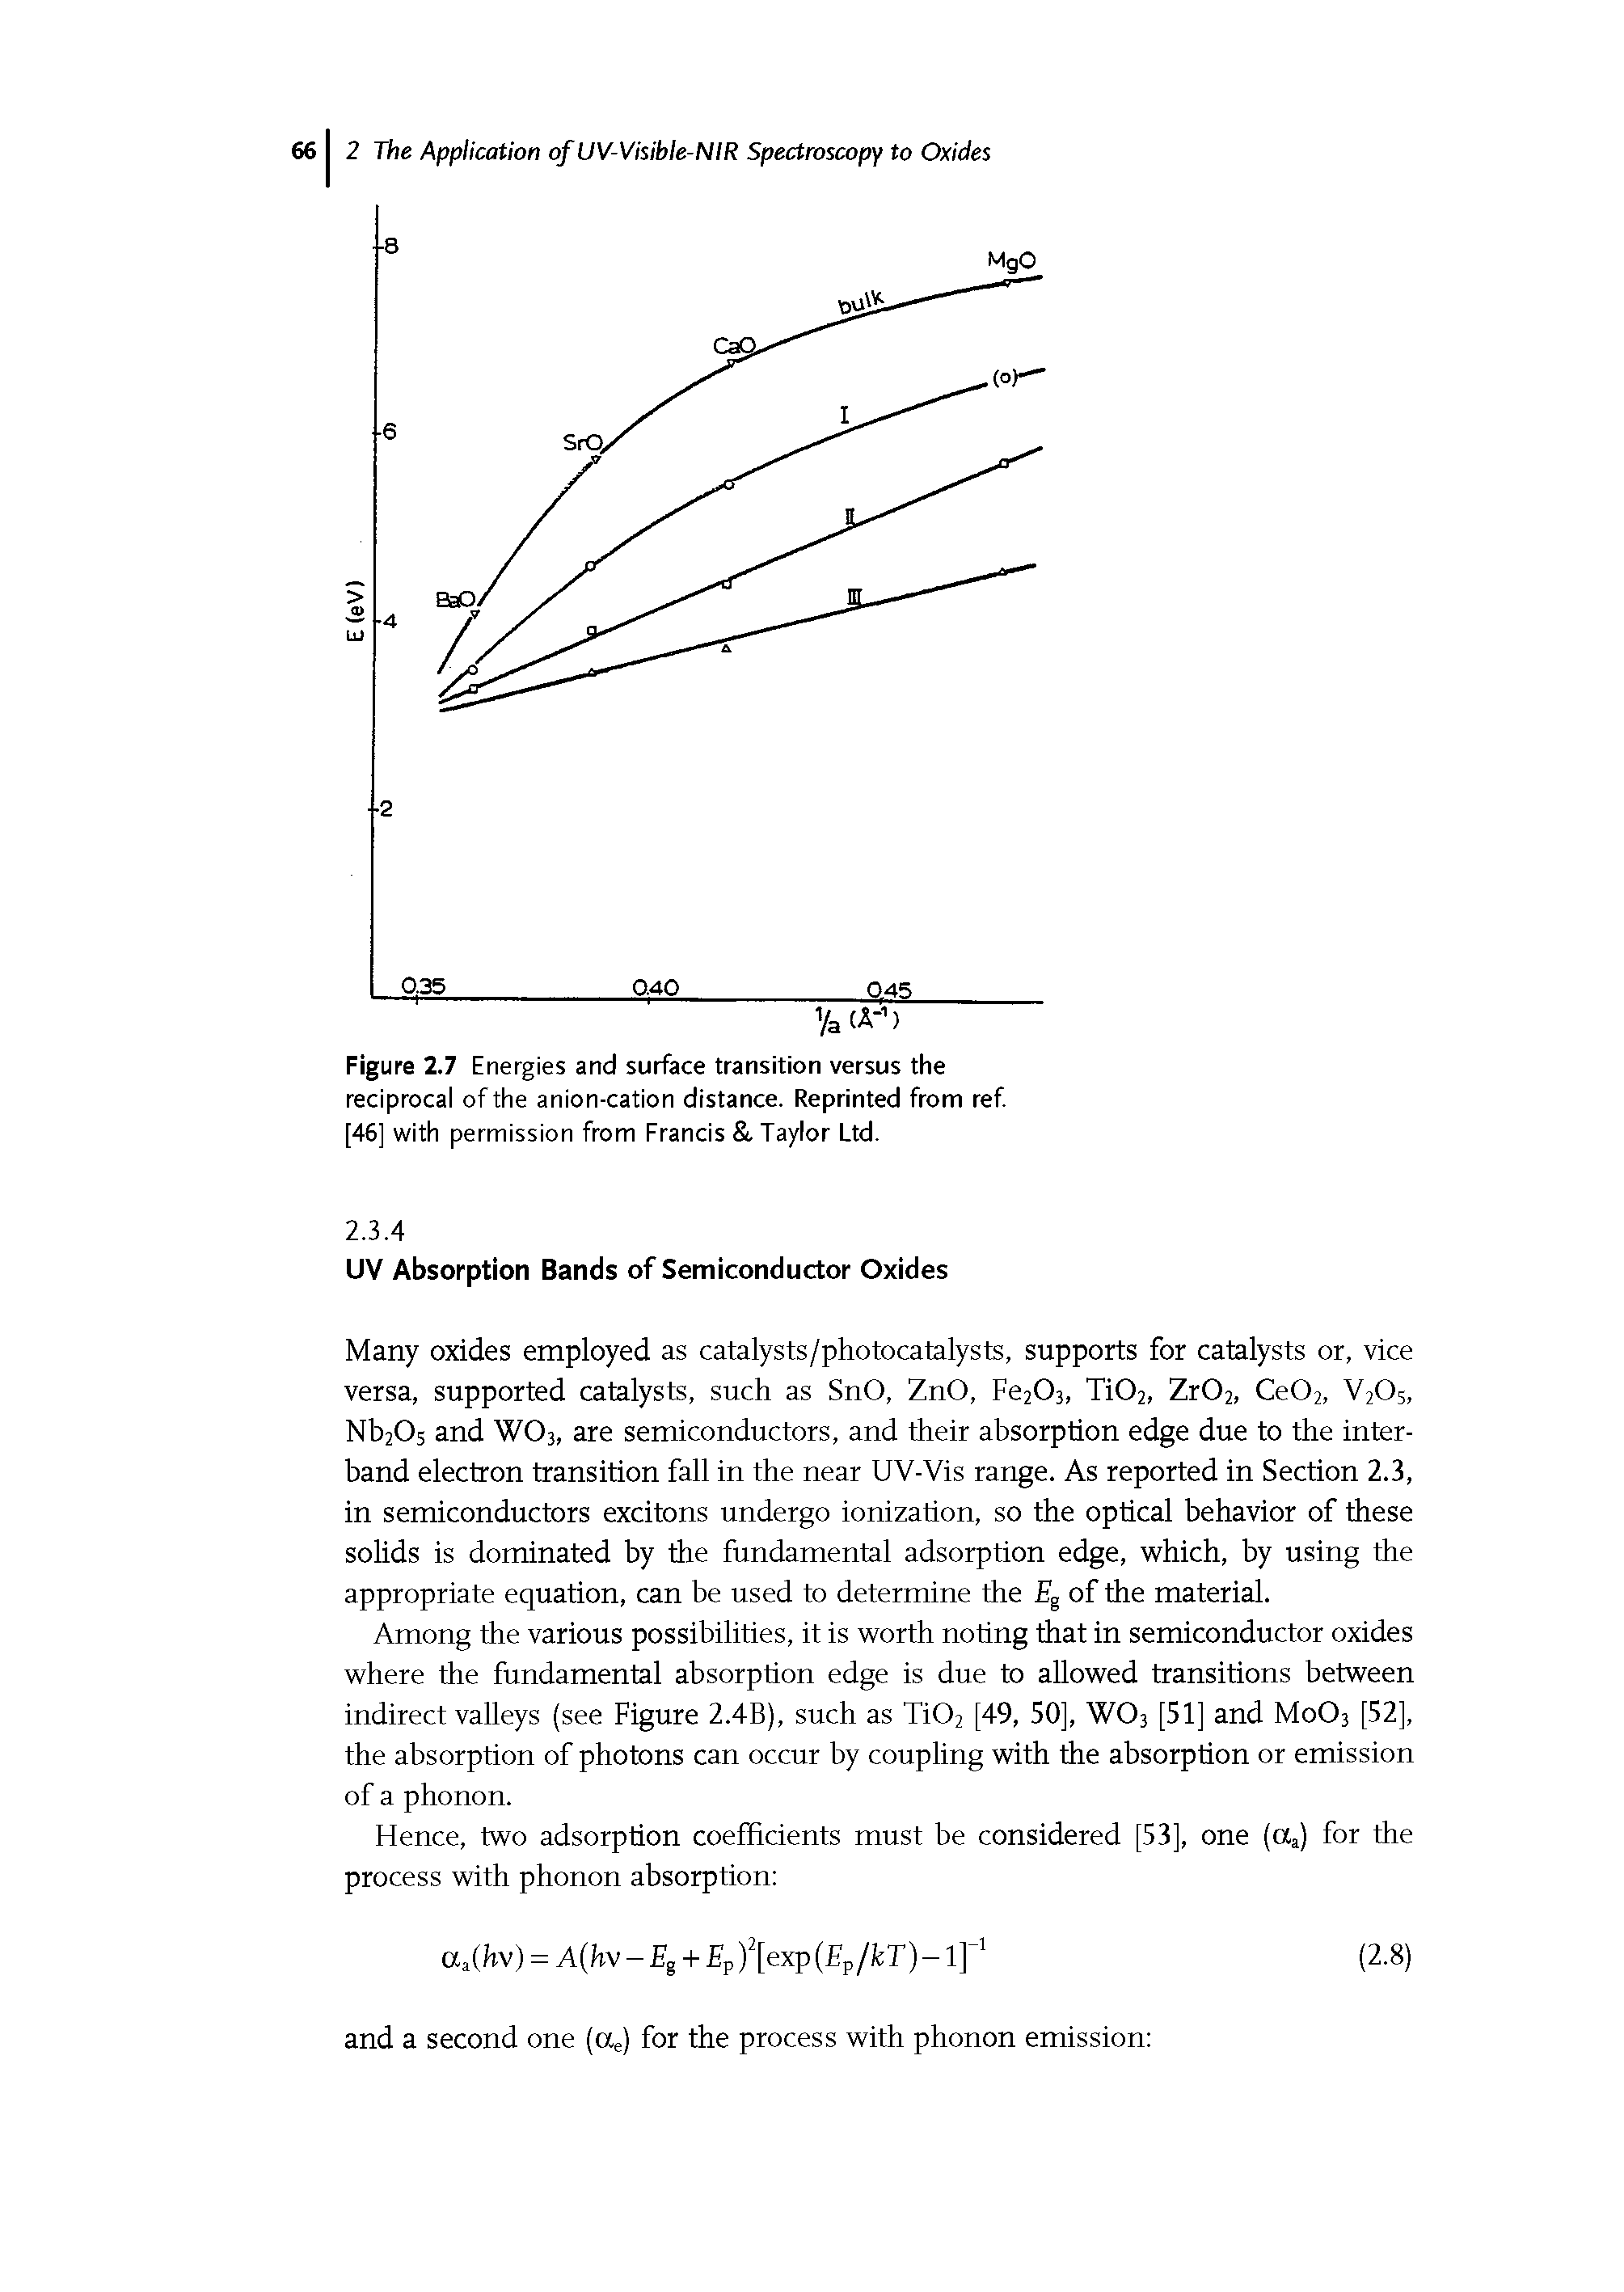 Figure 2.7 Energies and surface transition versus the reciprocal of the anion-cation distance. Reprinted from ref [46] with permission from Francis, Taylor Ltd.